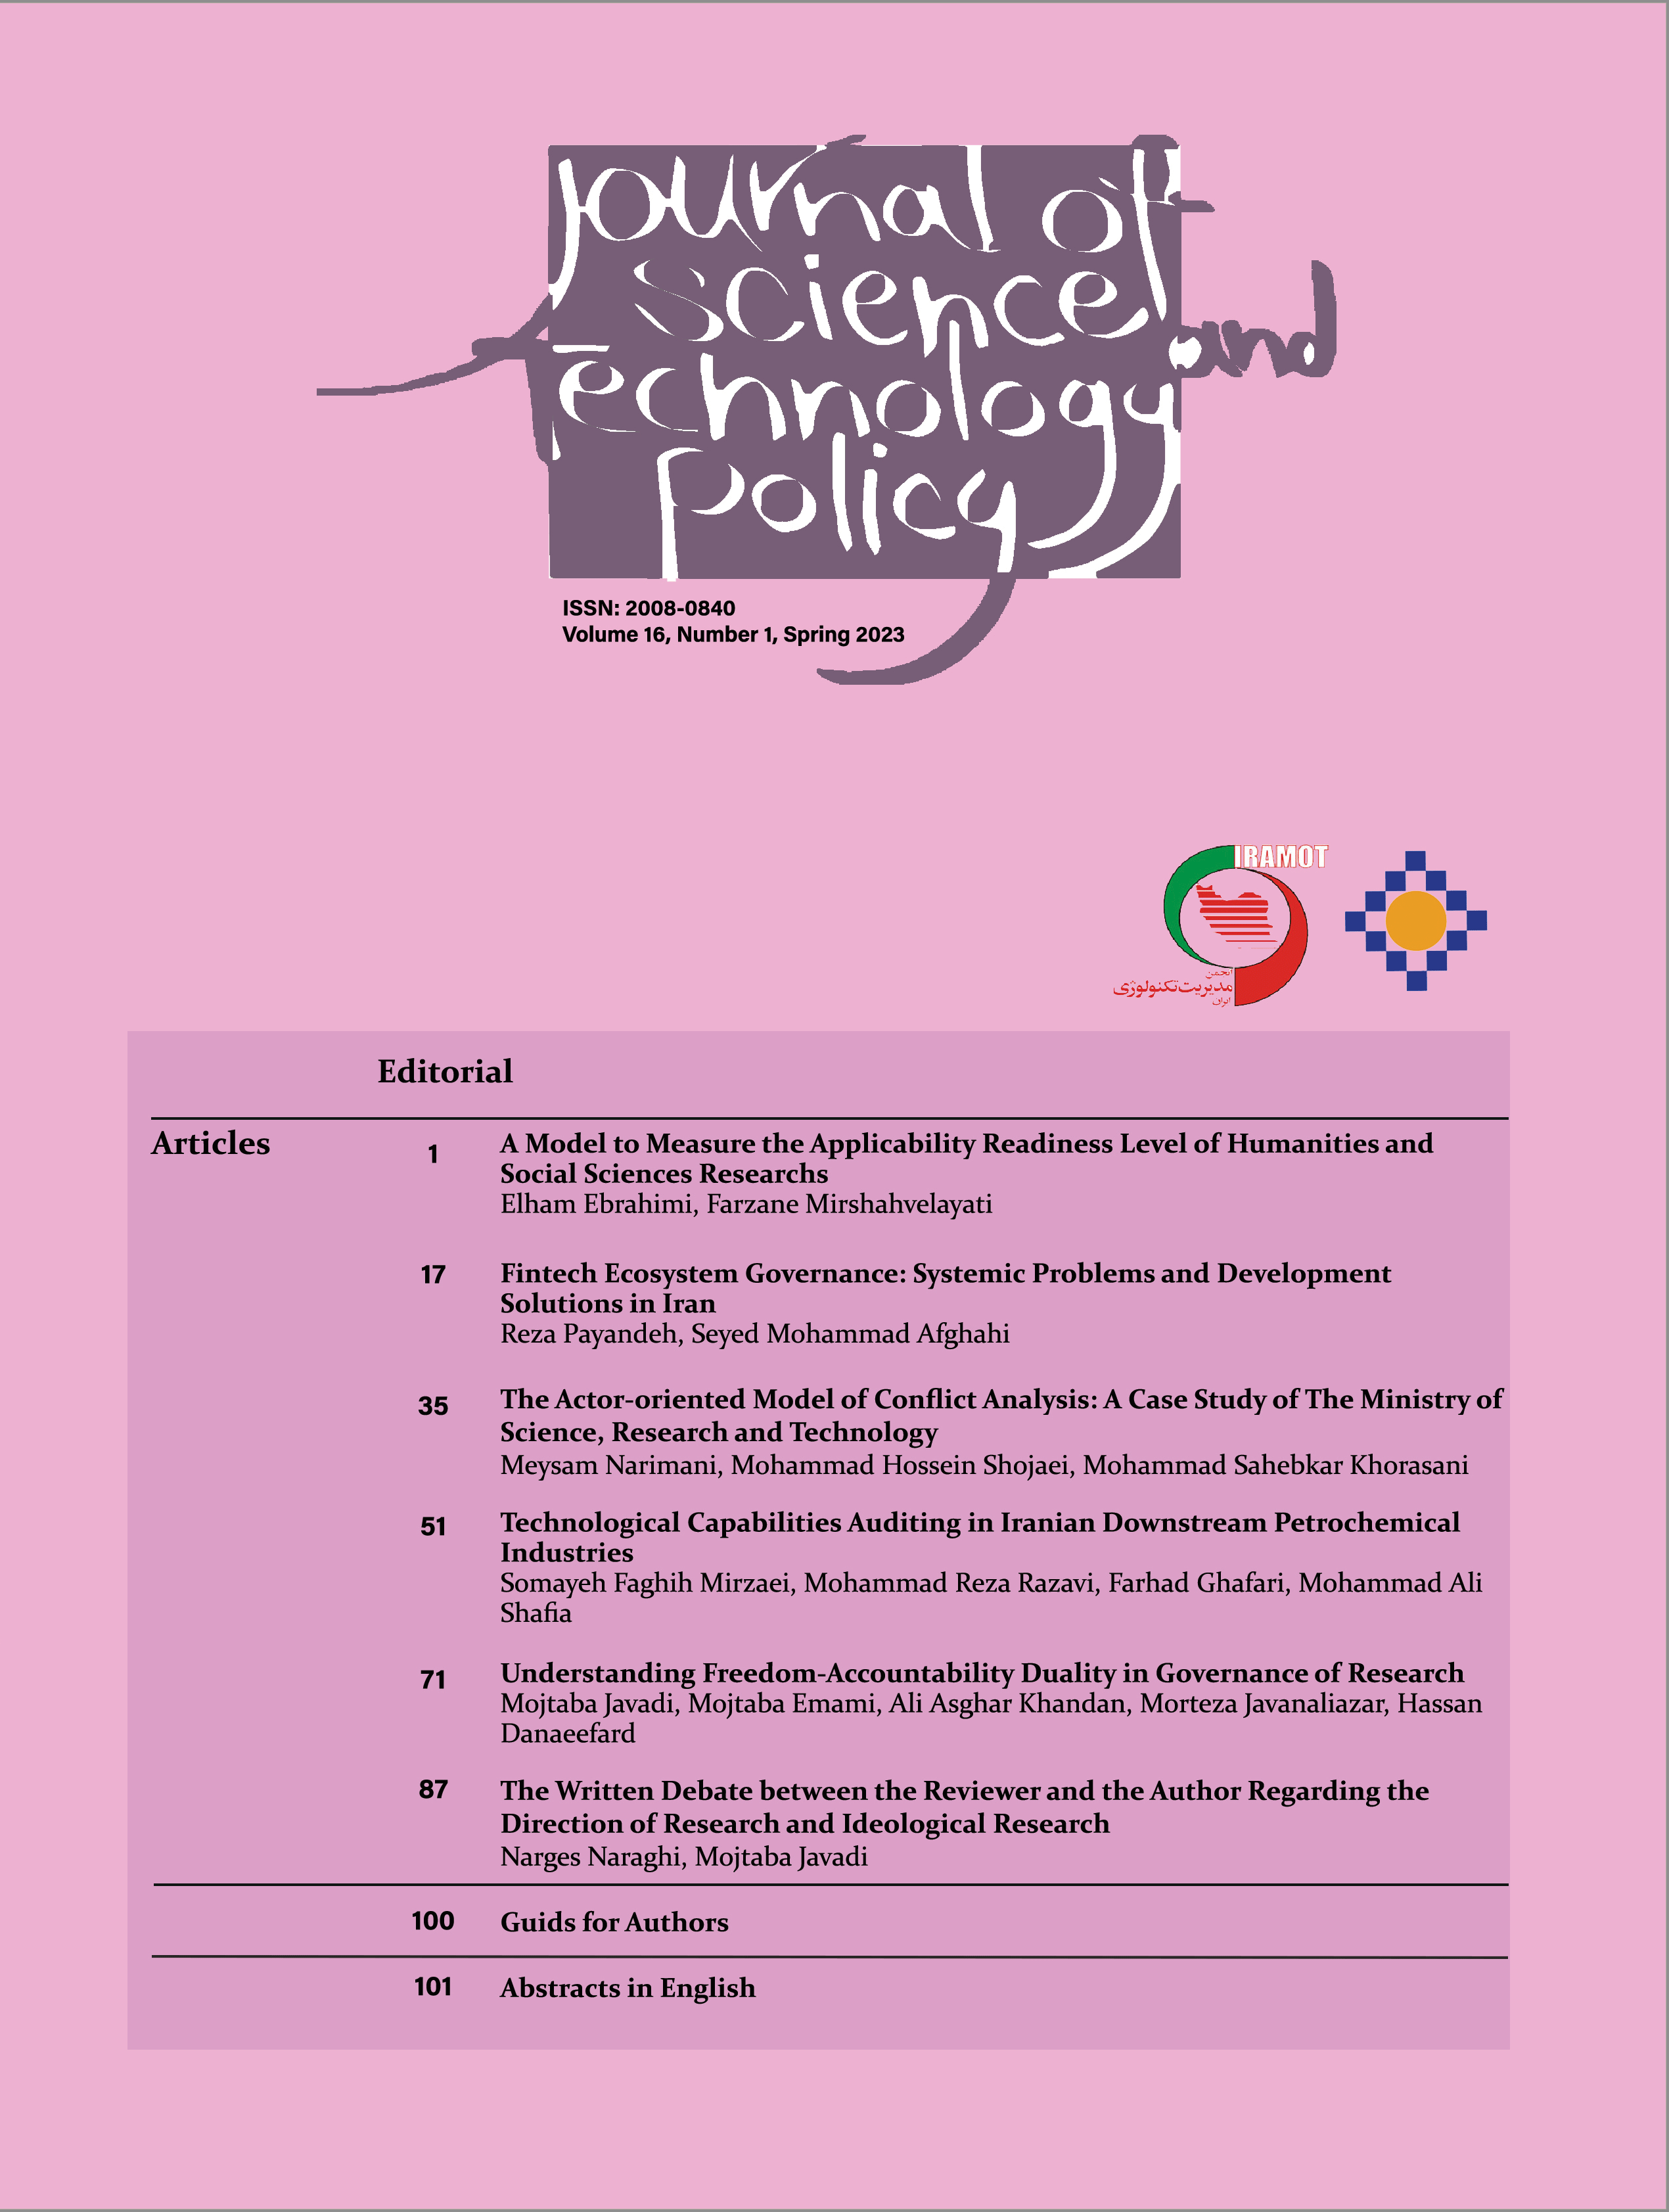 Journal of Science and Technology Policy